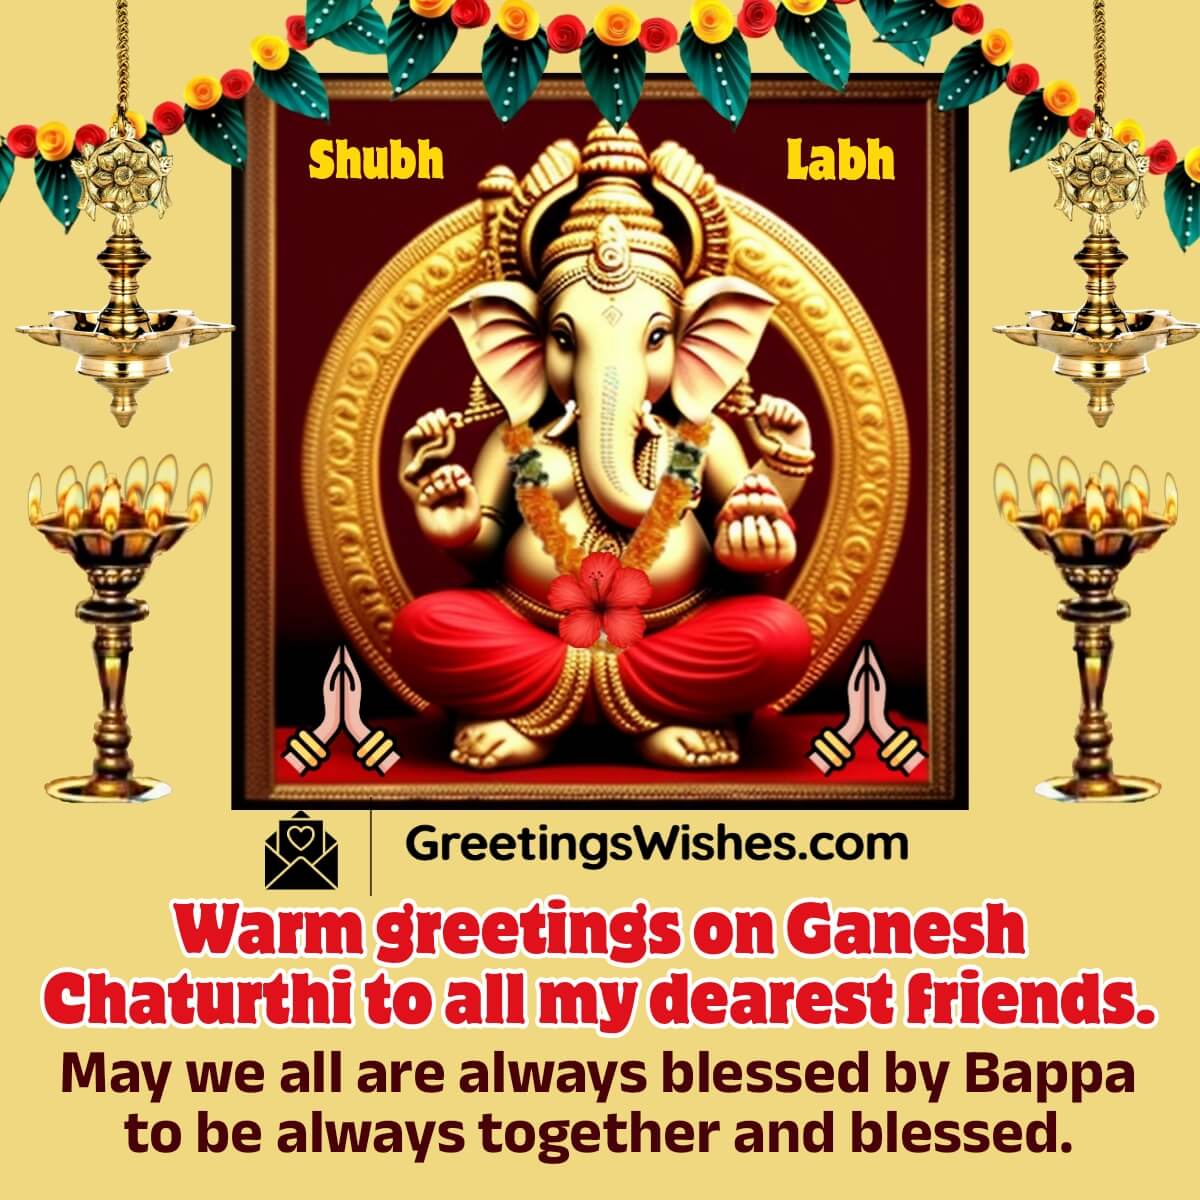 Warm Greetings On Ganesh Chaturthi To Friends